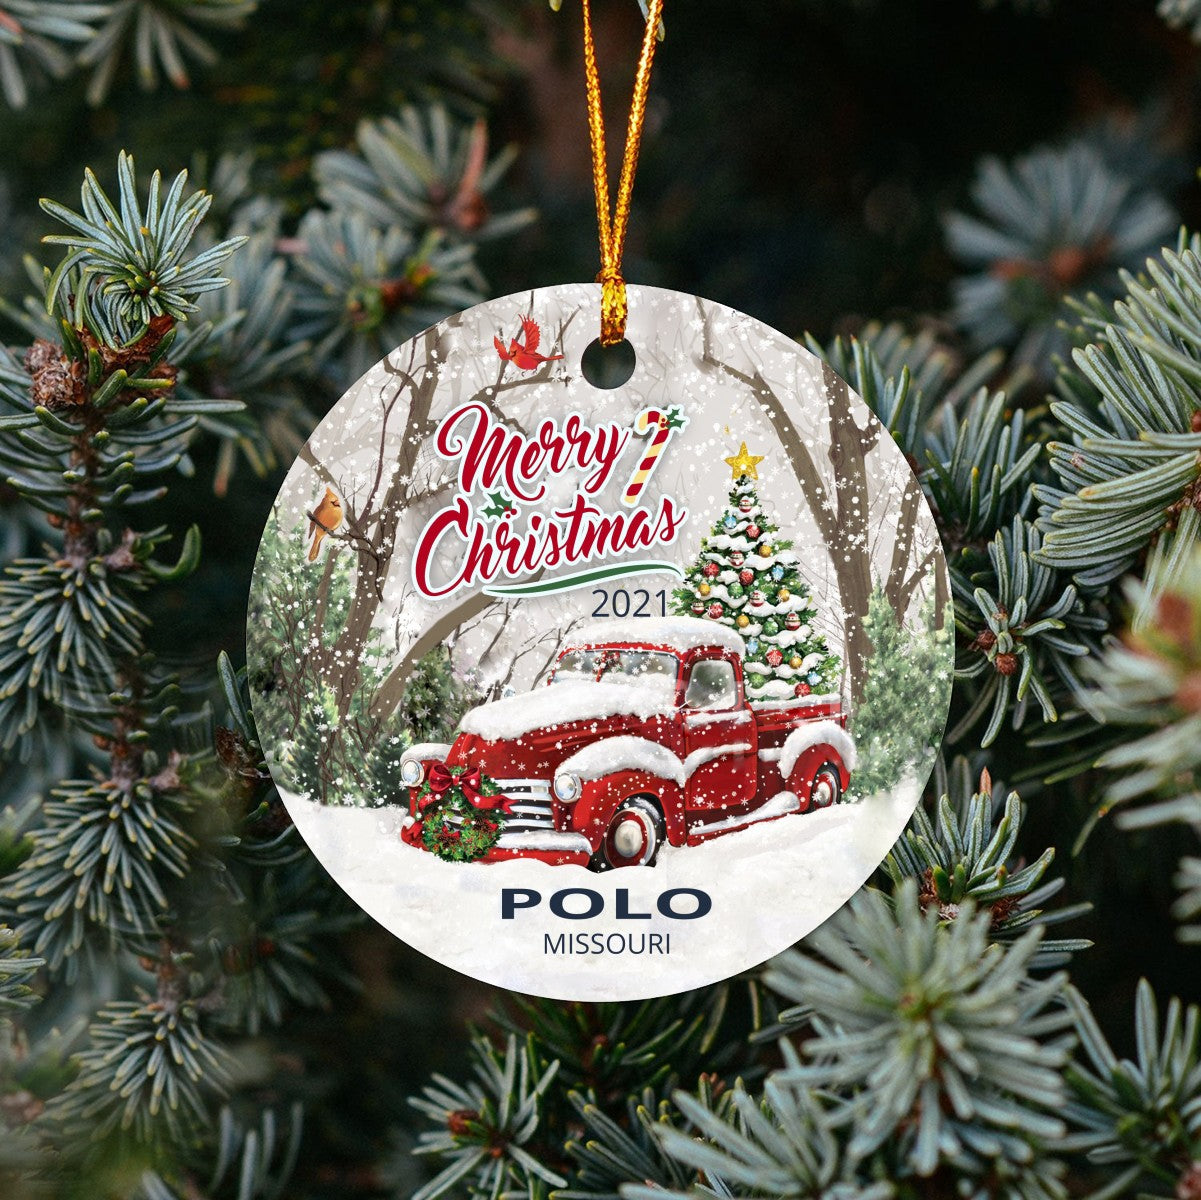 Christmas Tree Ornaments Polo - Ornament With Name City, State Polo Missouri MO Ornament - Red Truck Xmas Ornaments 3'' Plastic Gift For Family, Friend And Housewarming